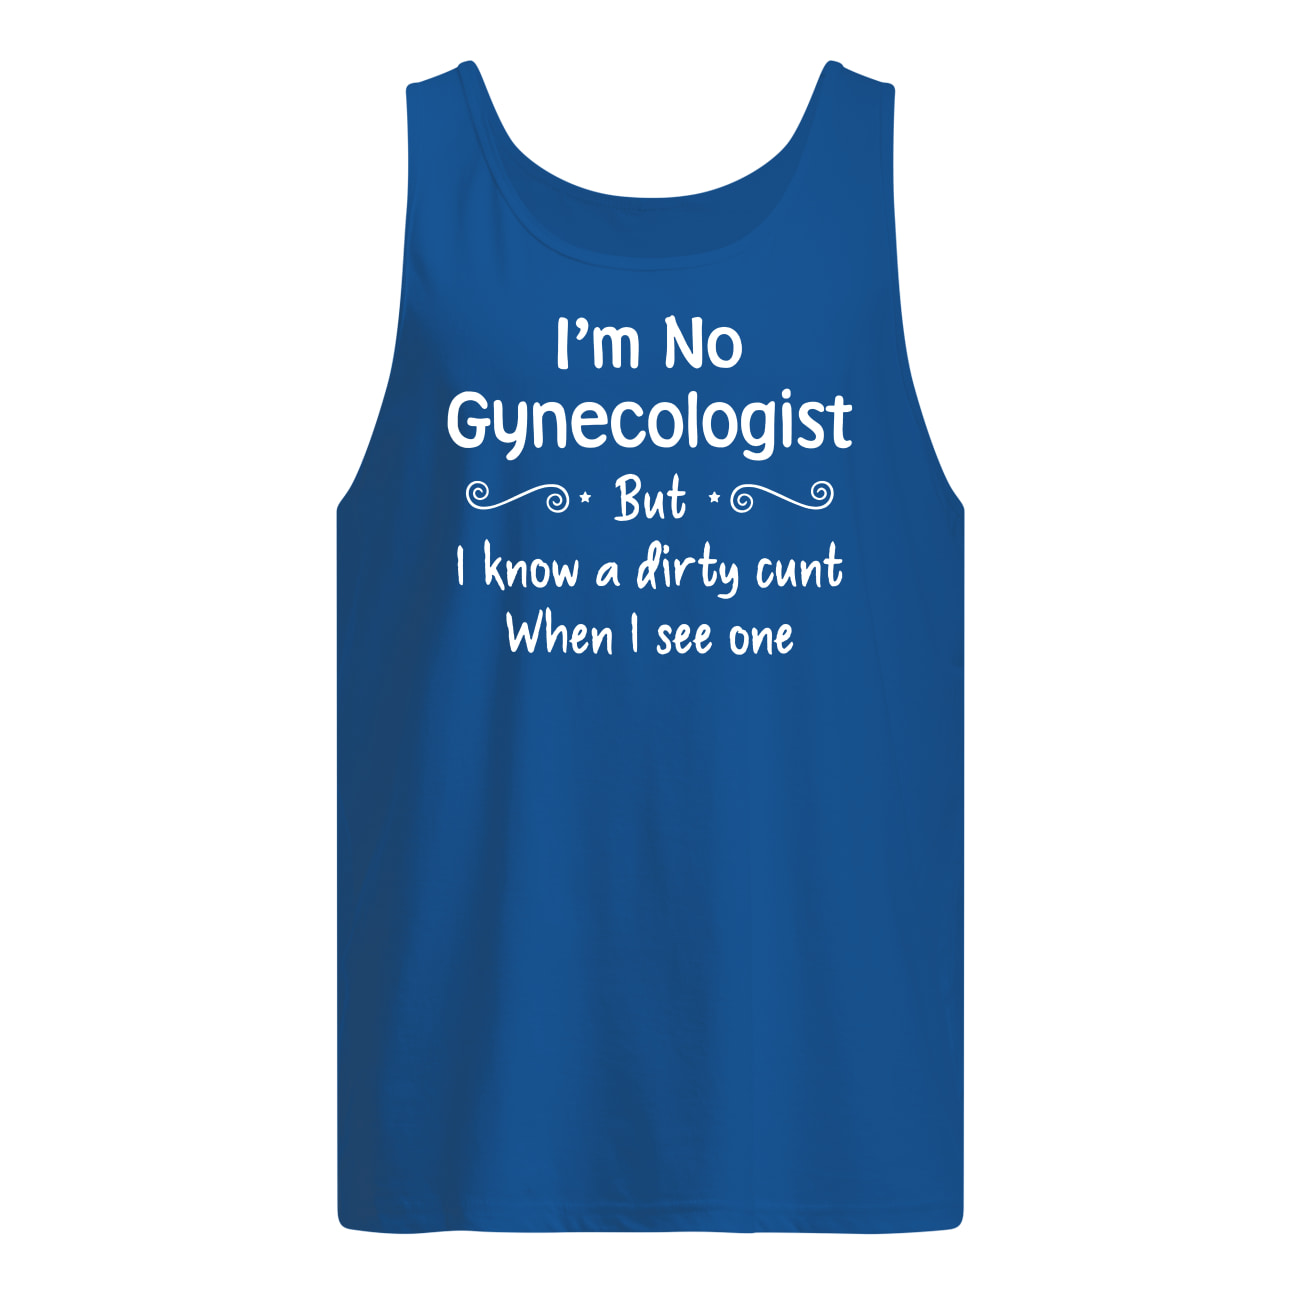 I'm not a gynecologist but I know a cunt when I see one tank top